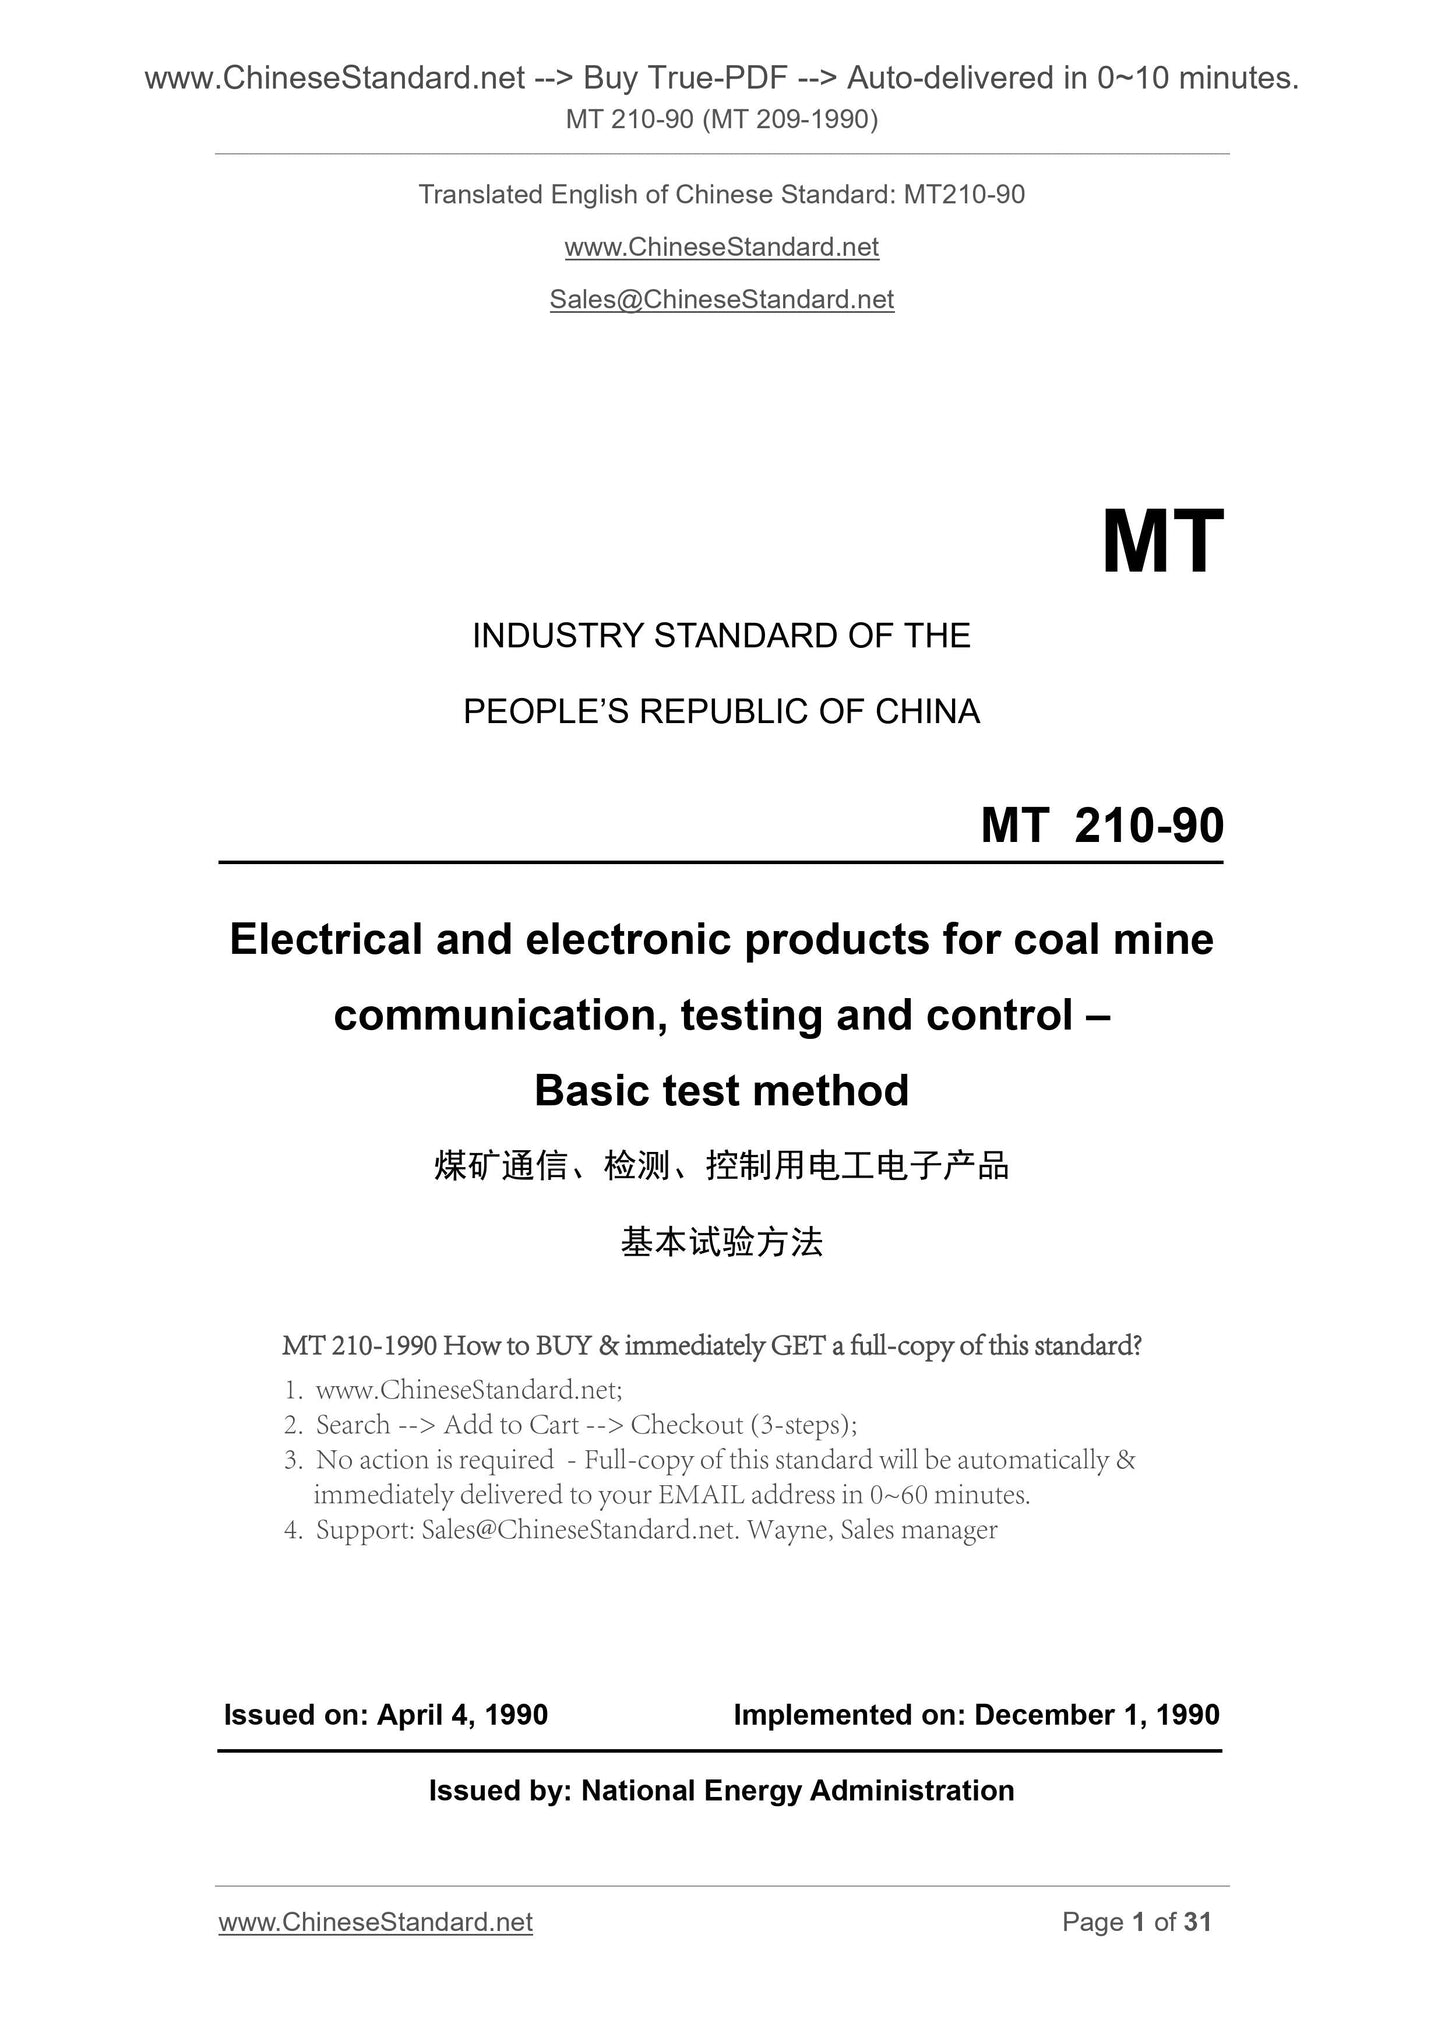 MT 210-1990 Page 1